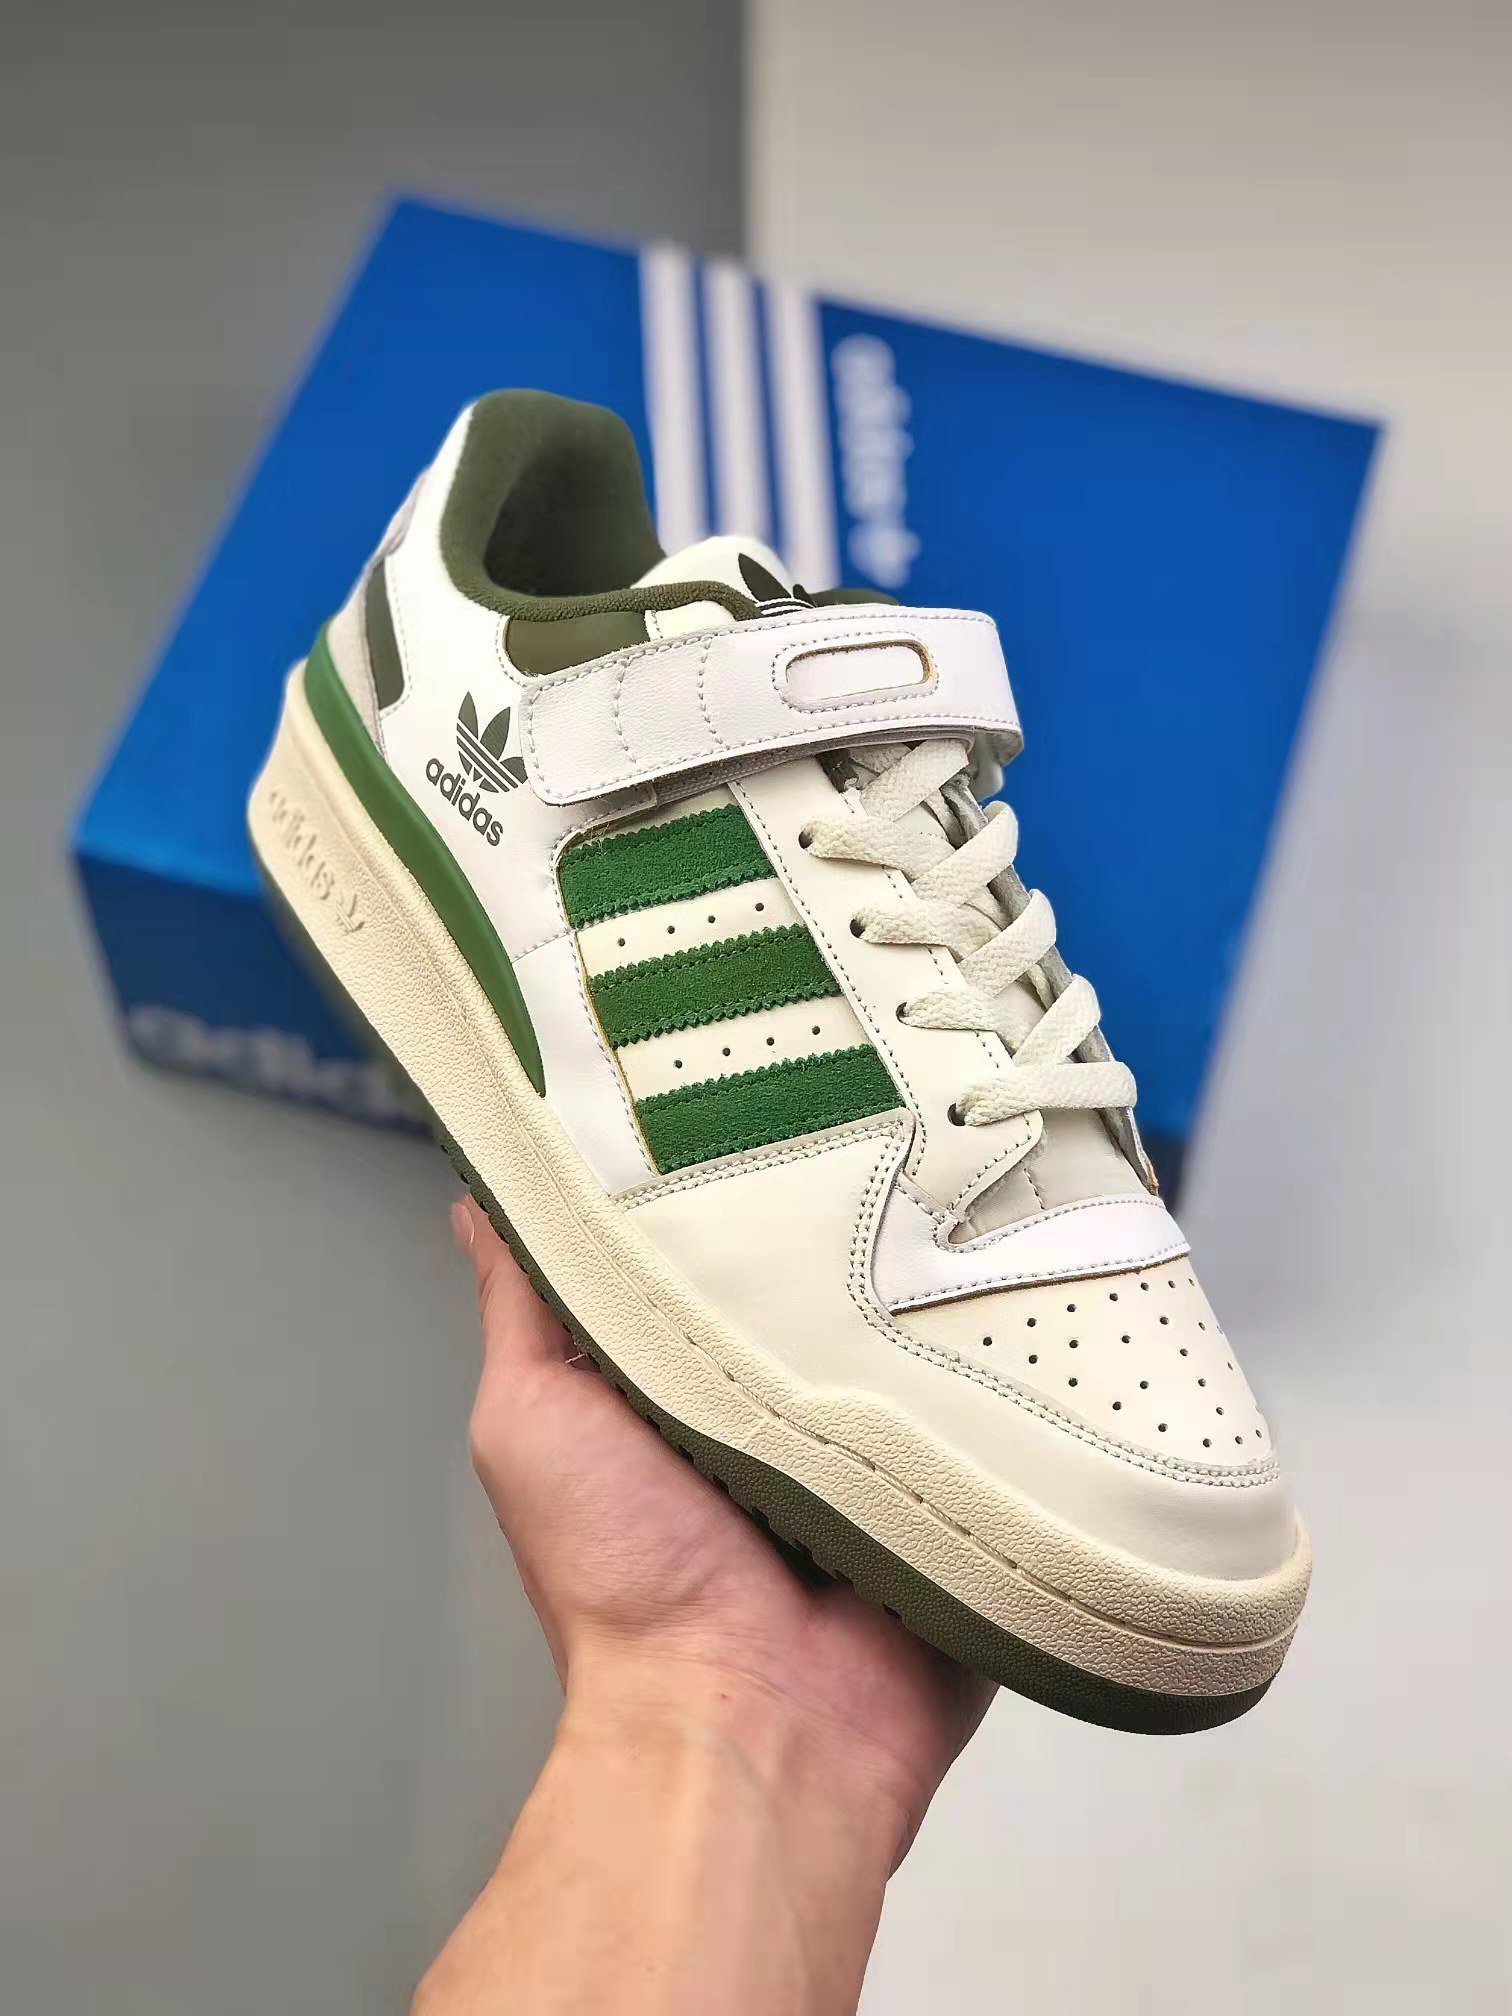 Adidas Forum 84 Low 'White Crew Green' FY8683 - Stylish and Versatile Footwear